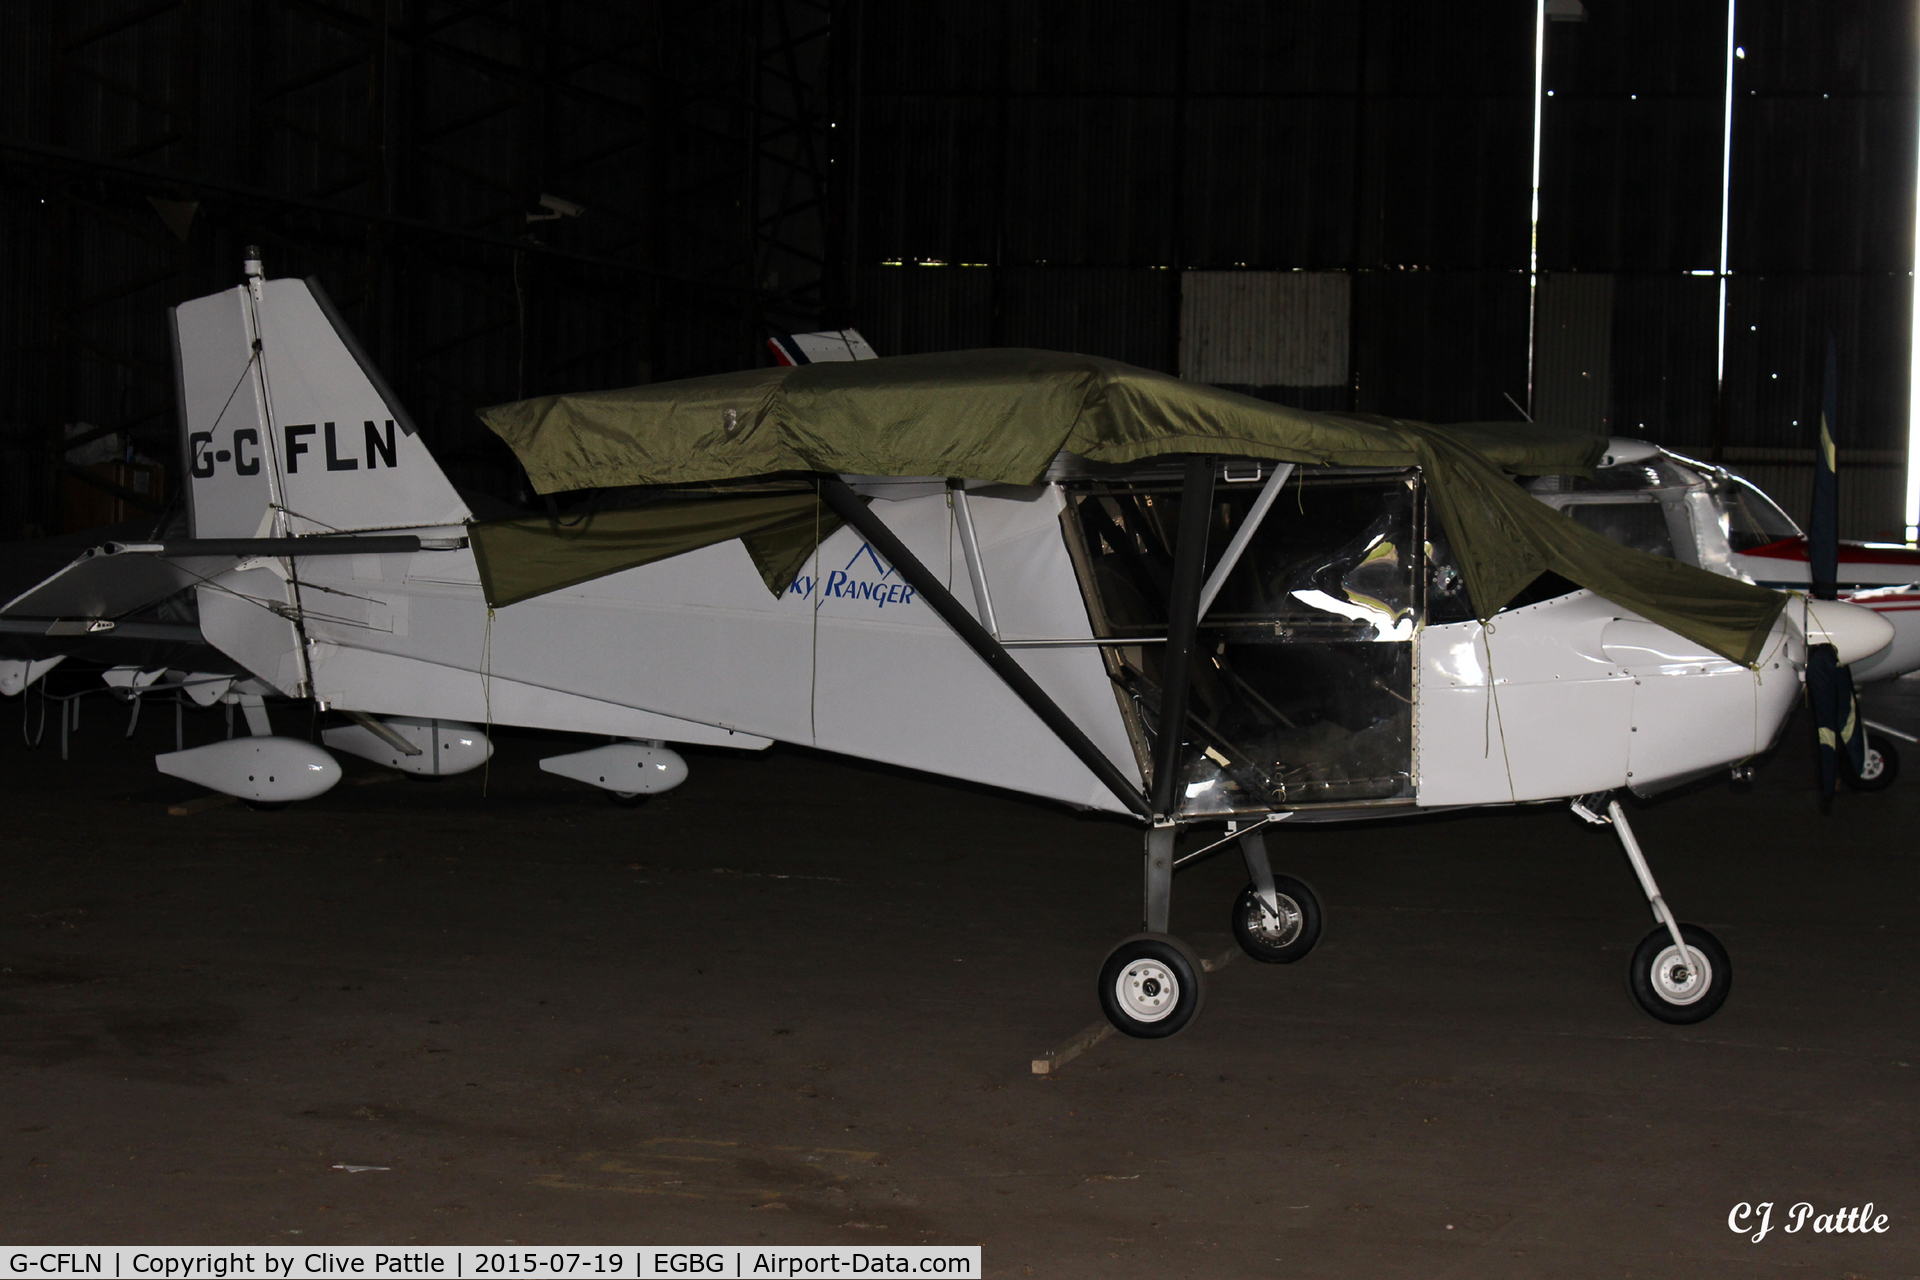 G-CFLN, 2008 Skyranger Swift 912S(1) C/N BMAA/HB/577, Hangared at Leicester EGBG